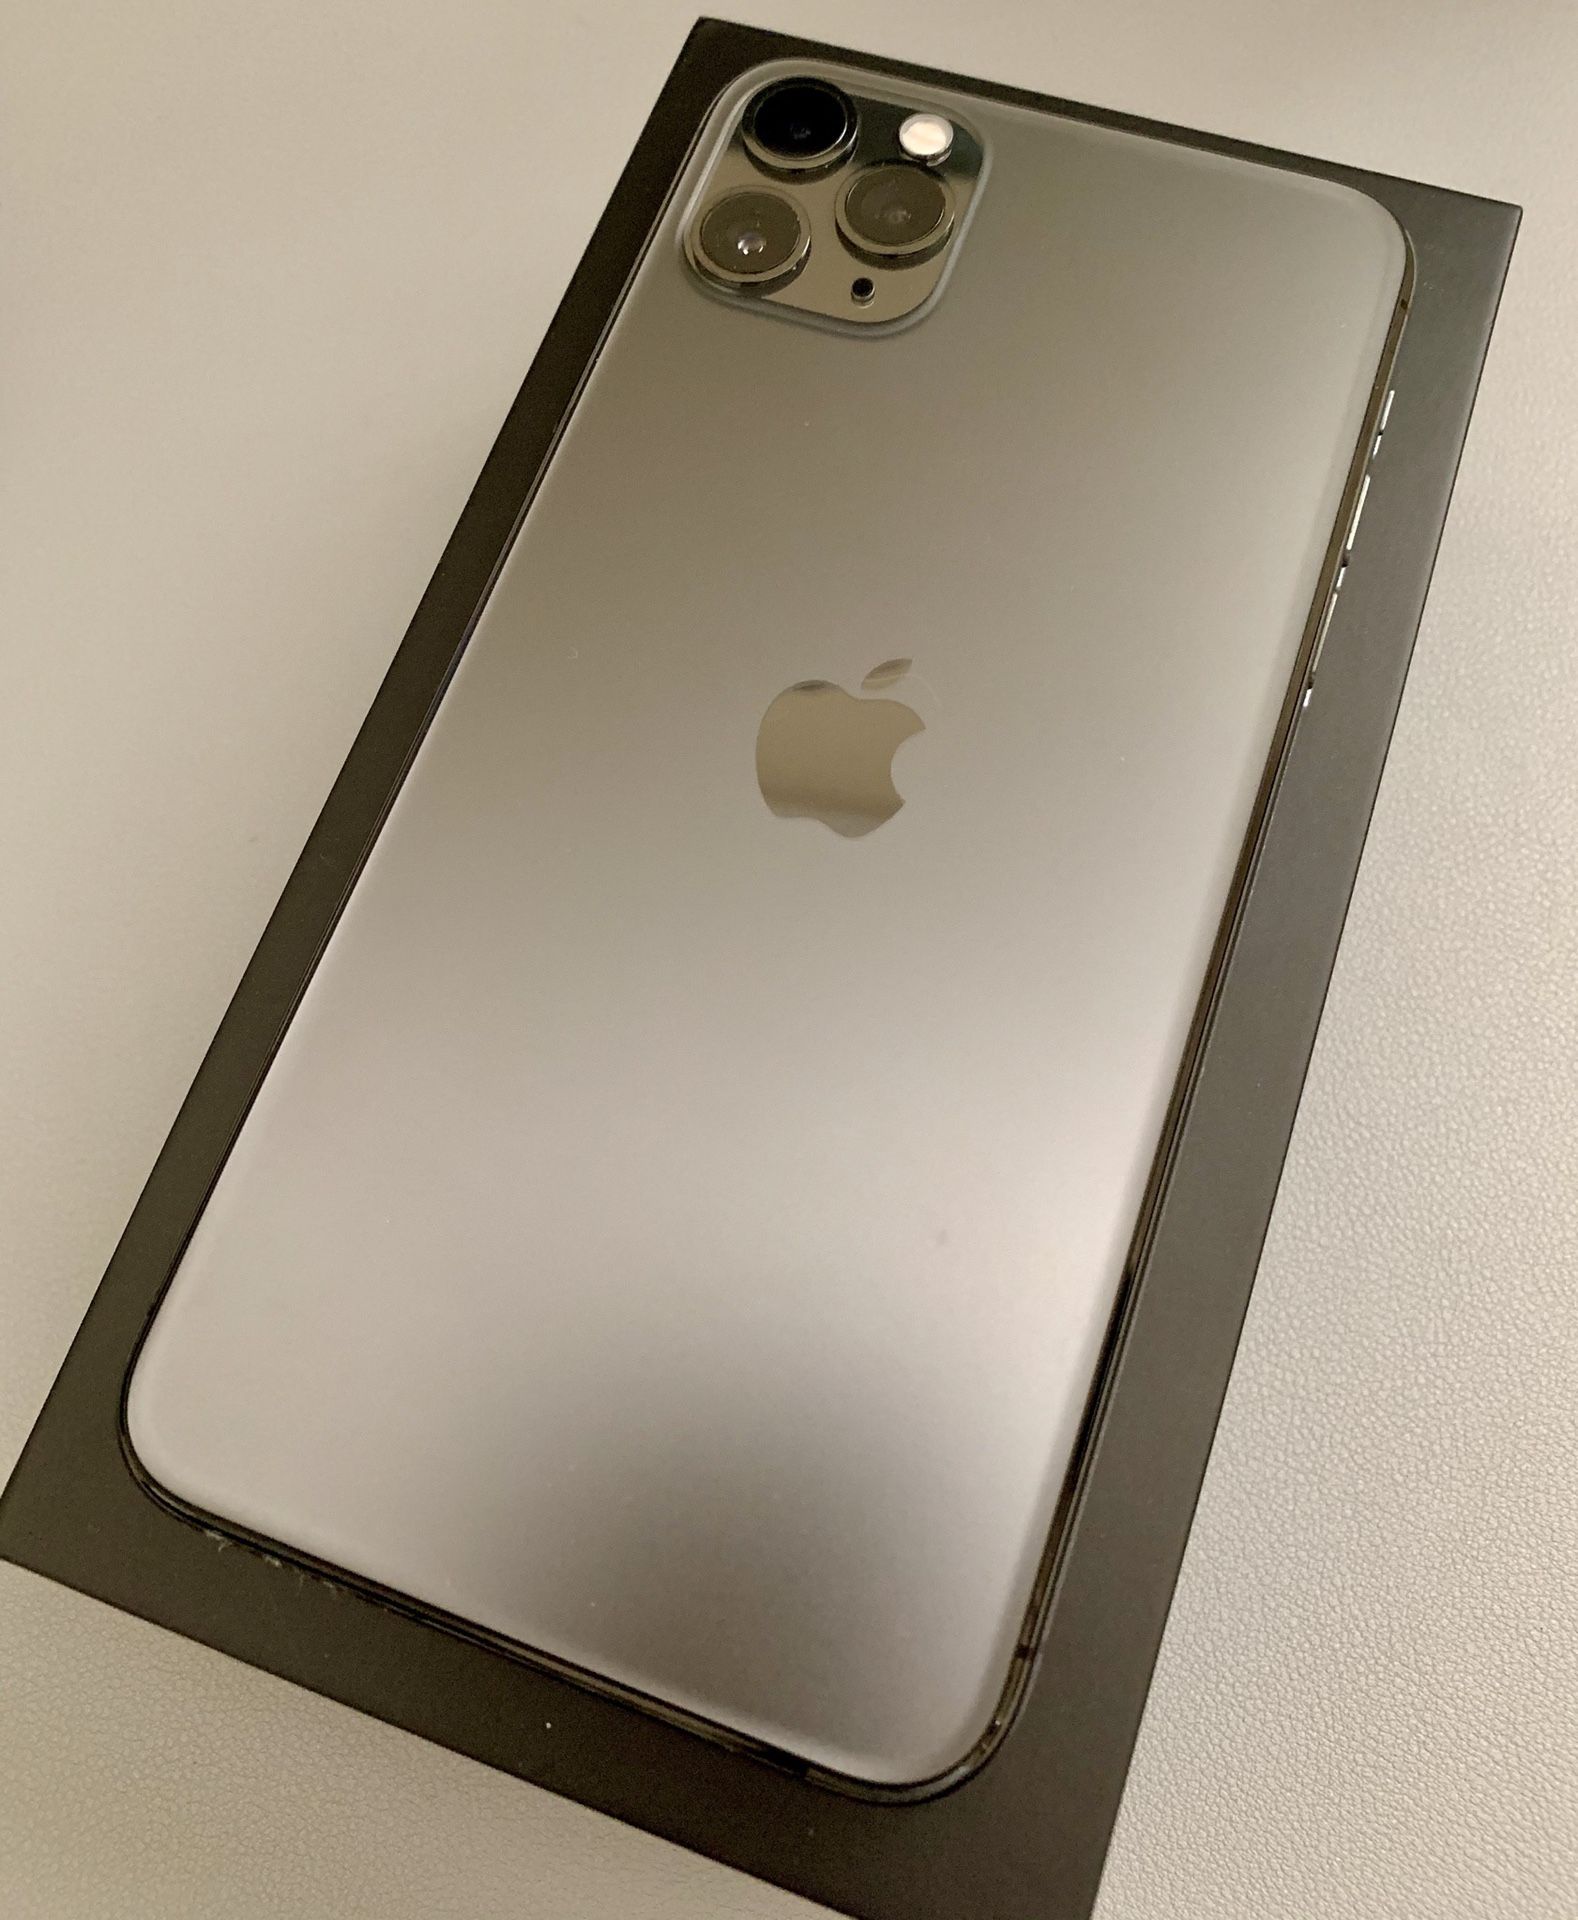 NEW and UNLOCKED Space Gray iPhone 11 Pro Max 64 GB